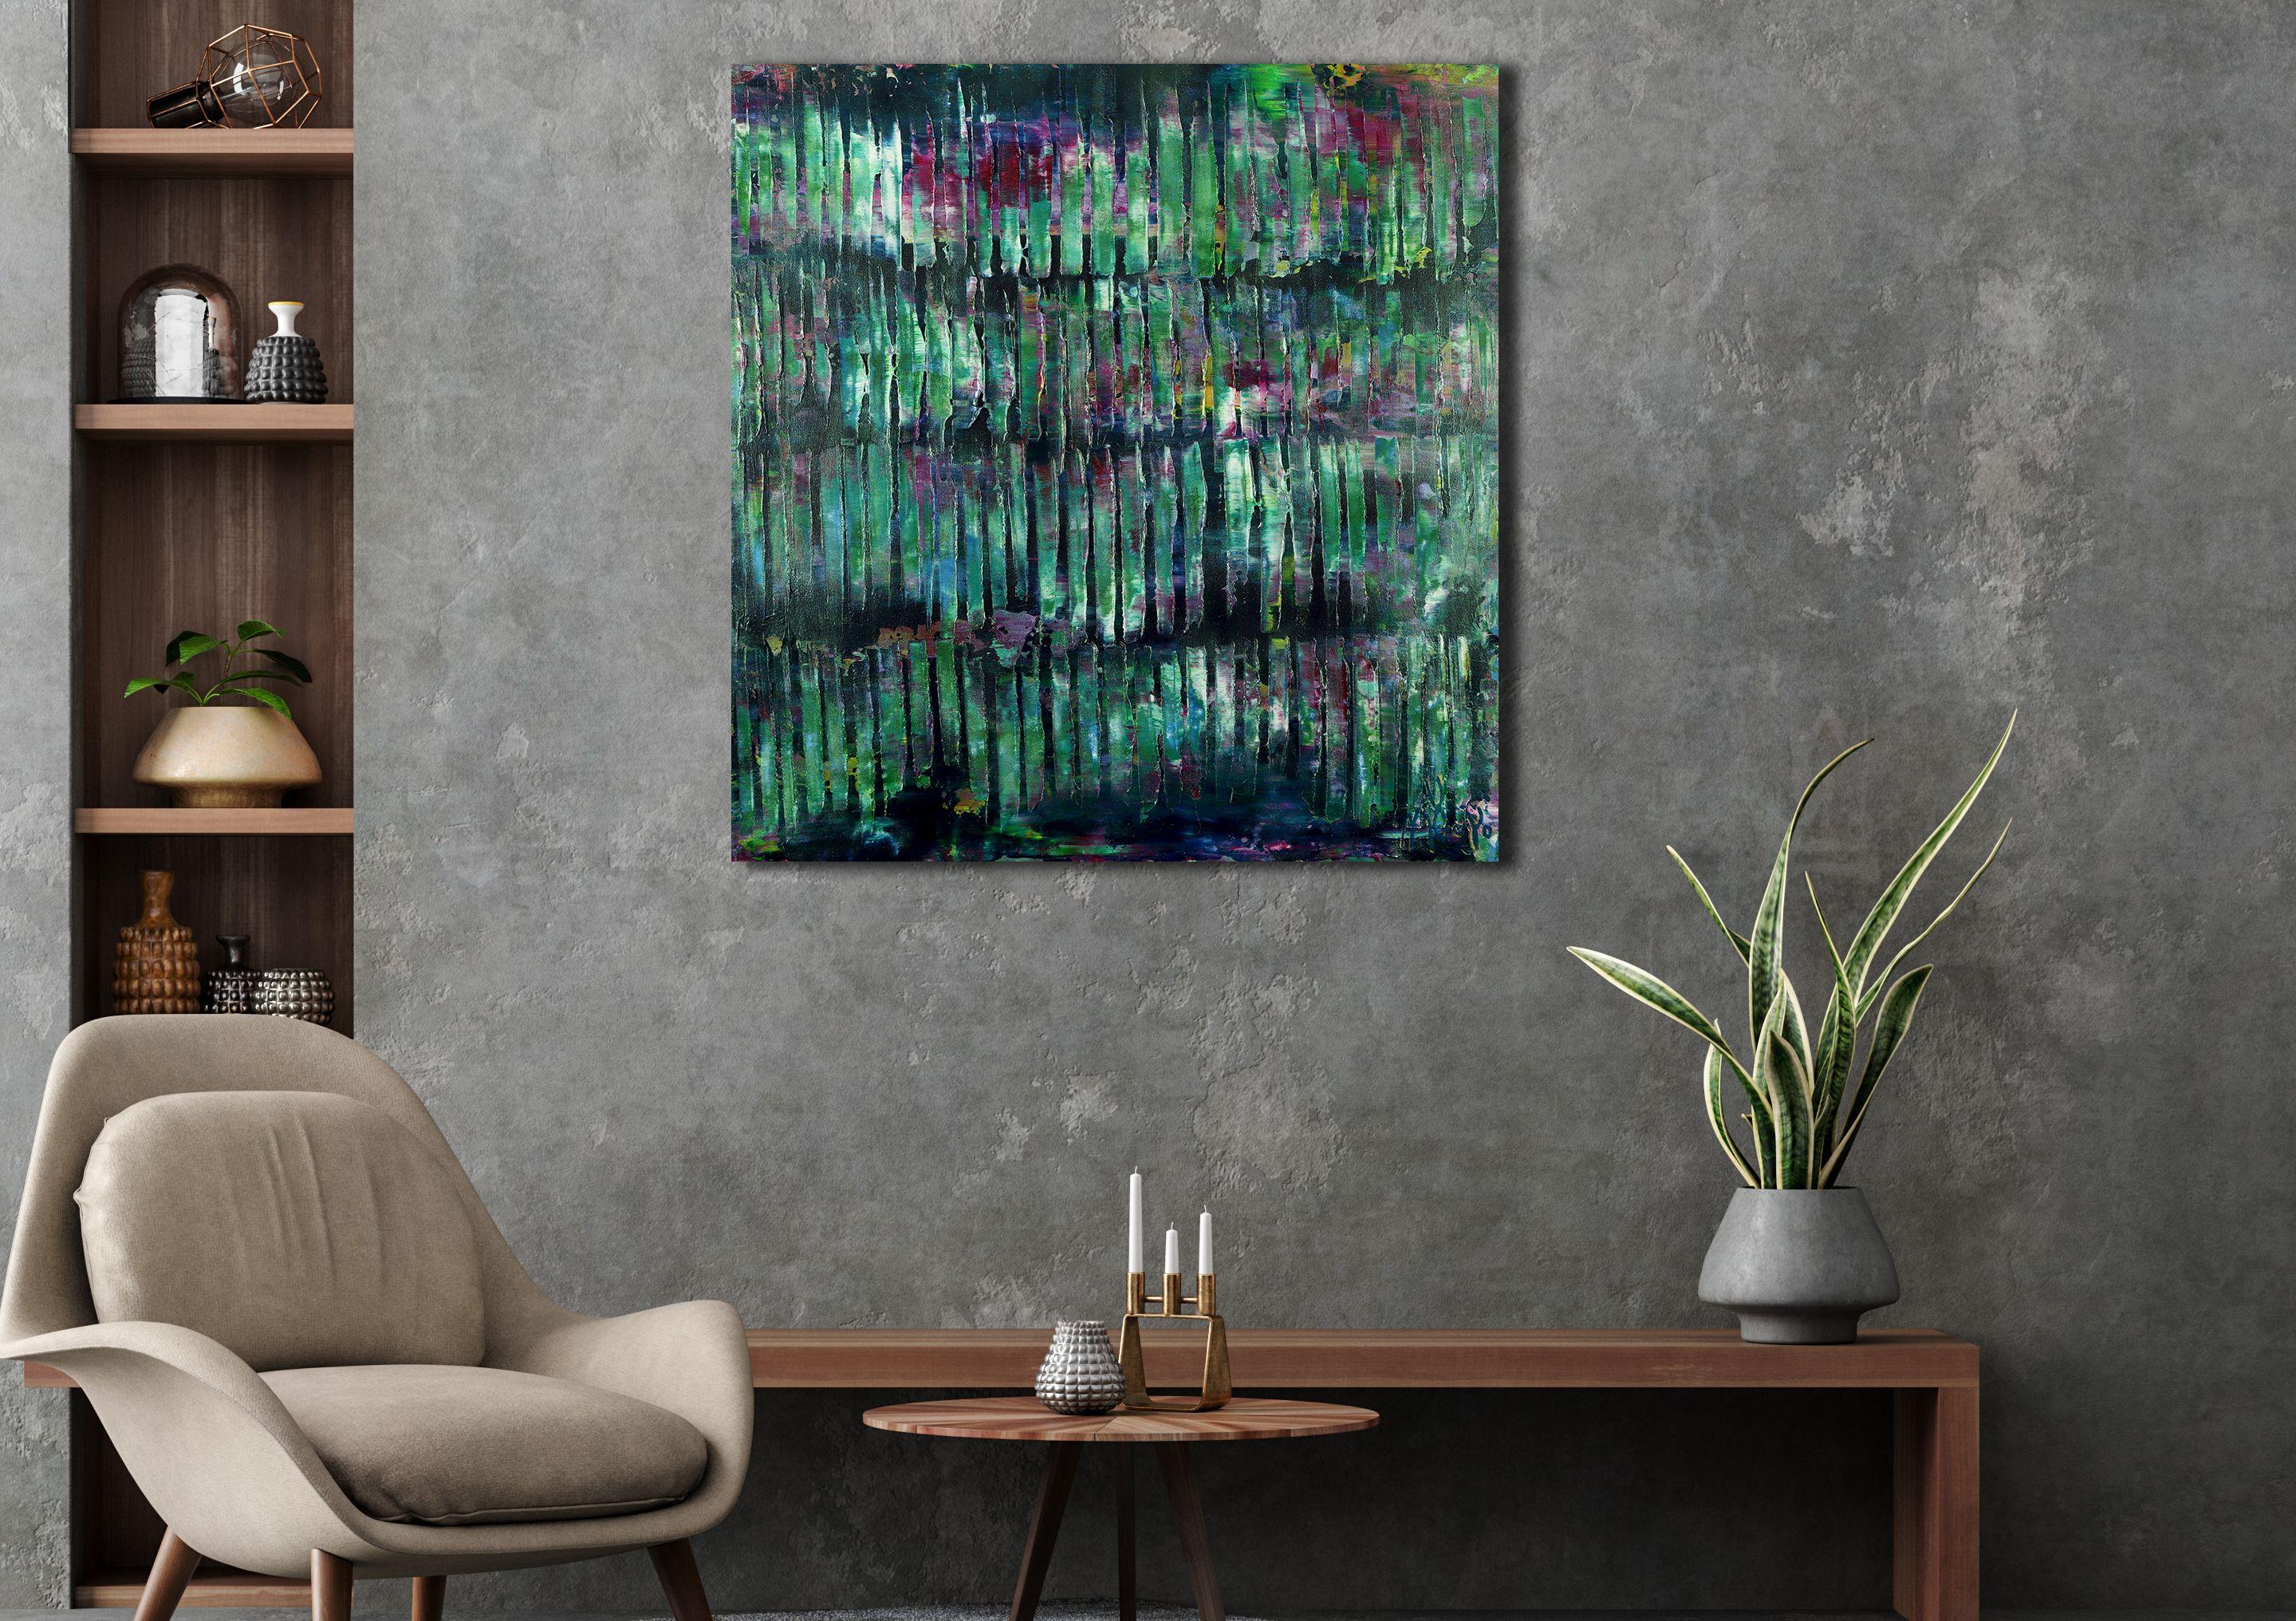 Abstract iridescent painting  acrylic on canvas    This artwork was created layering and blending layers of many shades of green, magenta, and green iridescent mica particles. This painting is very dimensional and has changes in tones with different